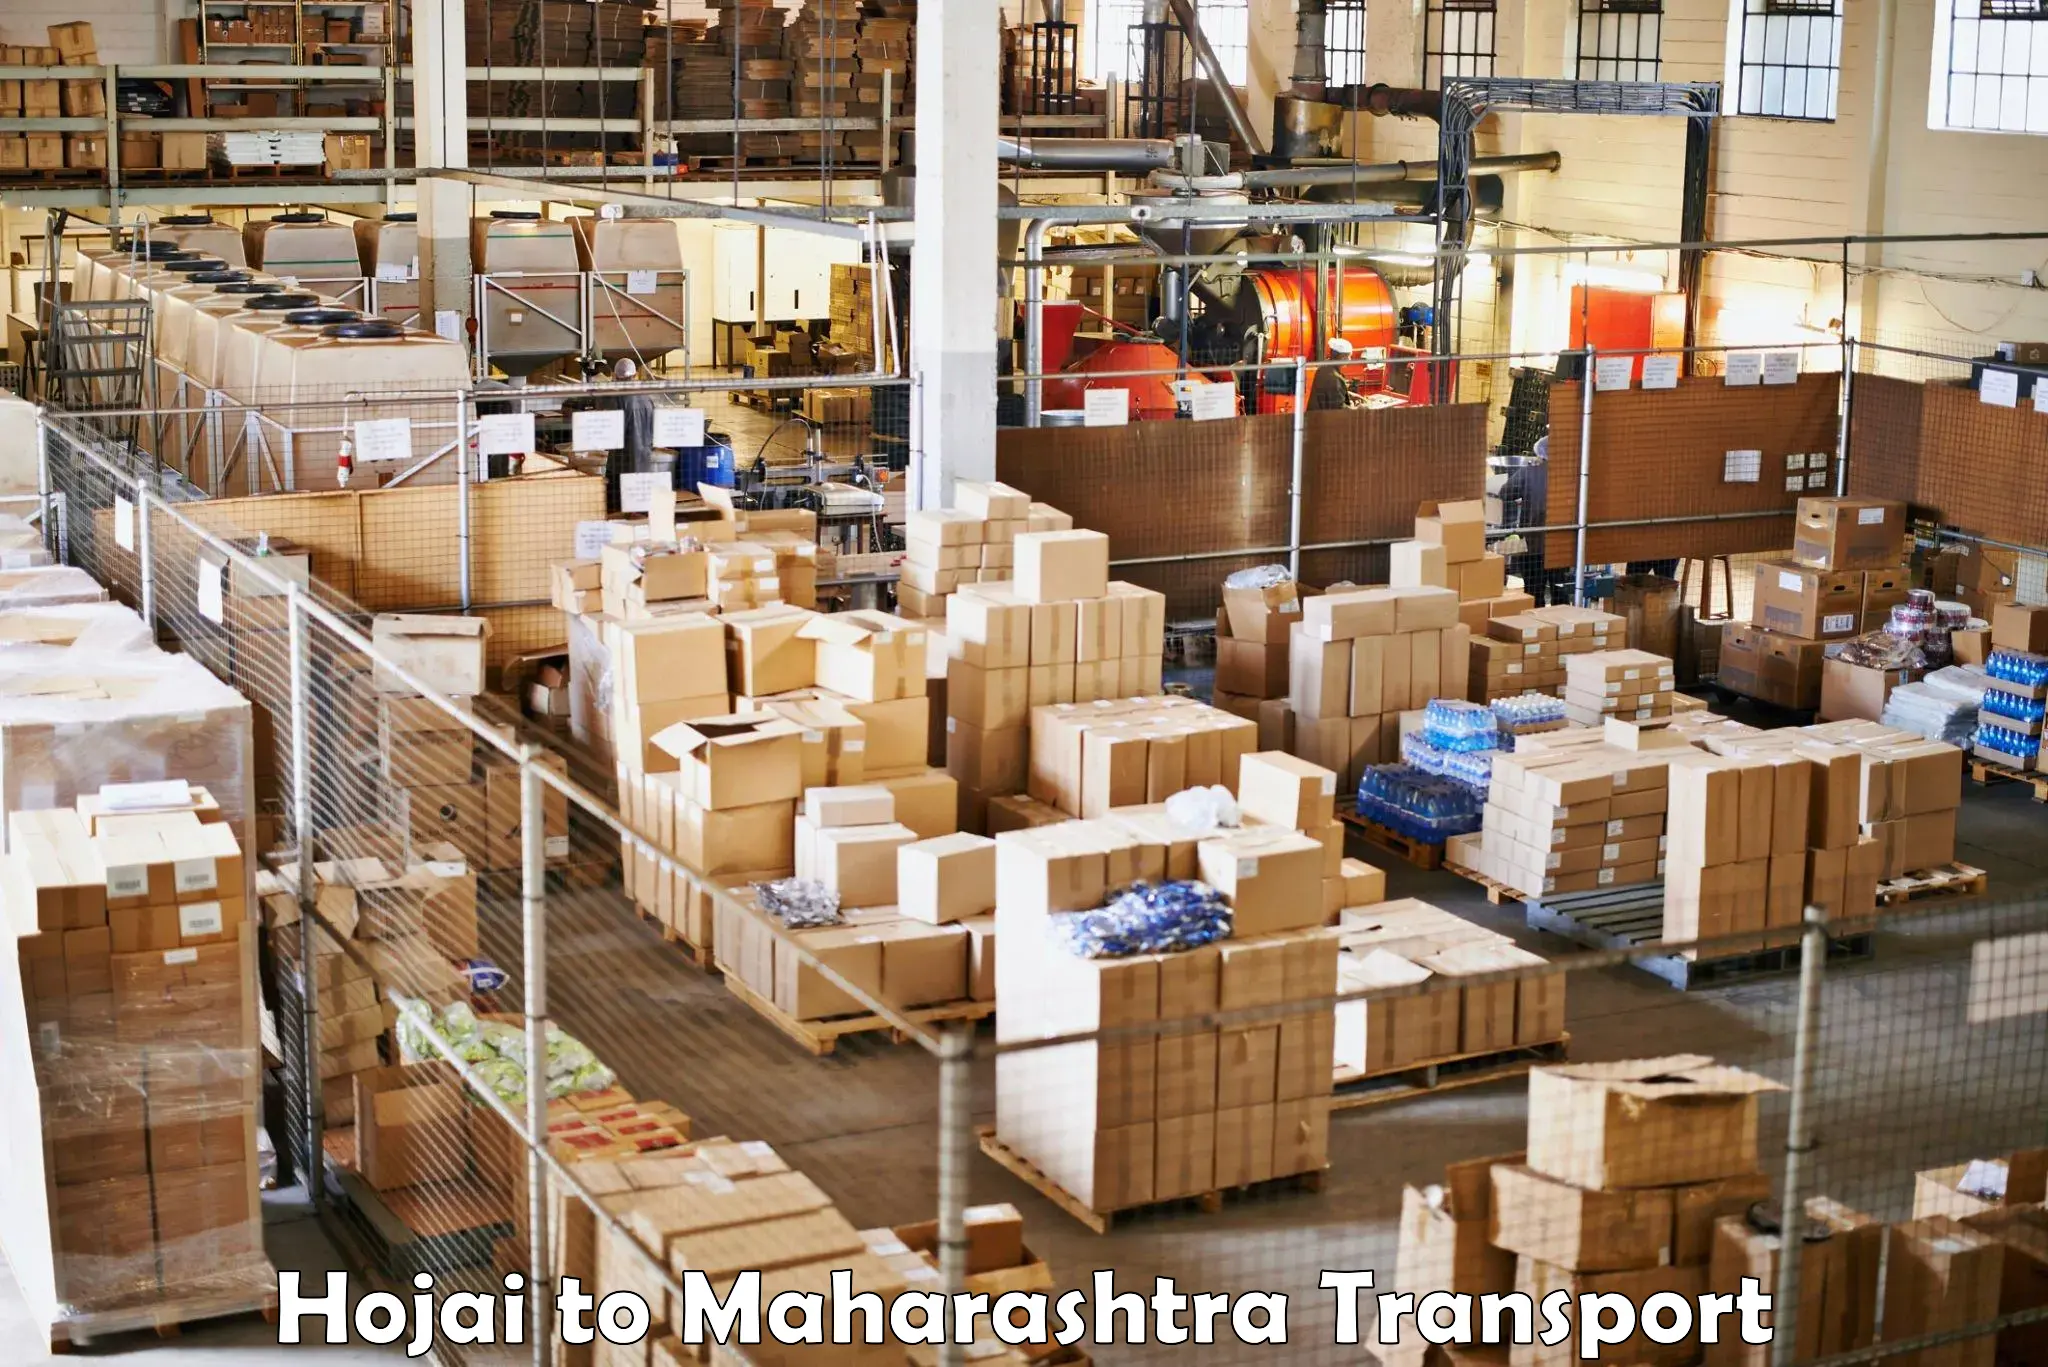 Truck transport companies in India Hojai to Paithan